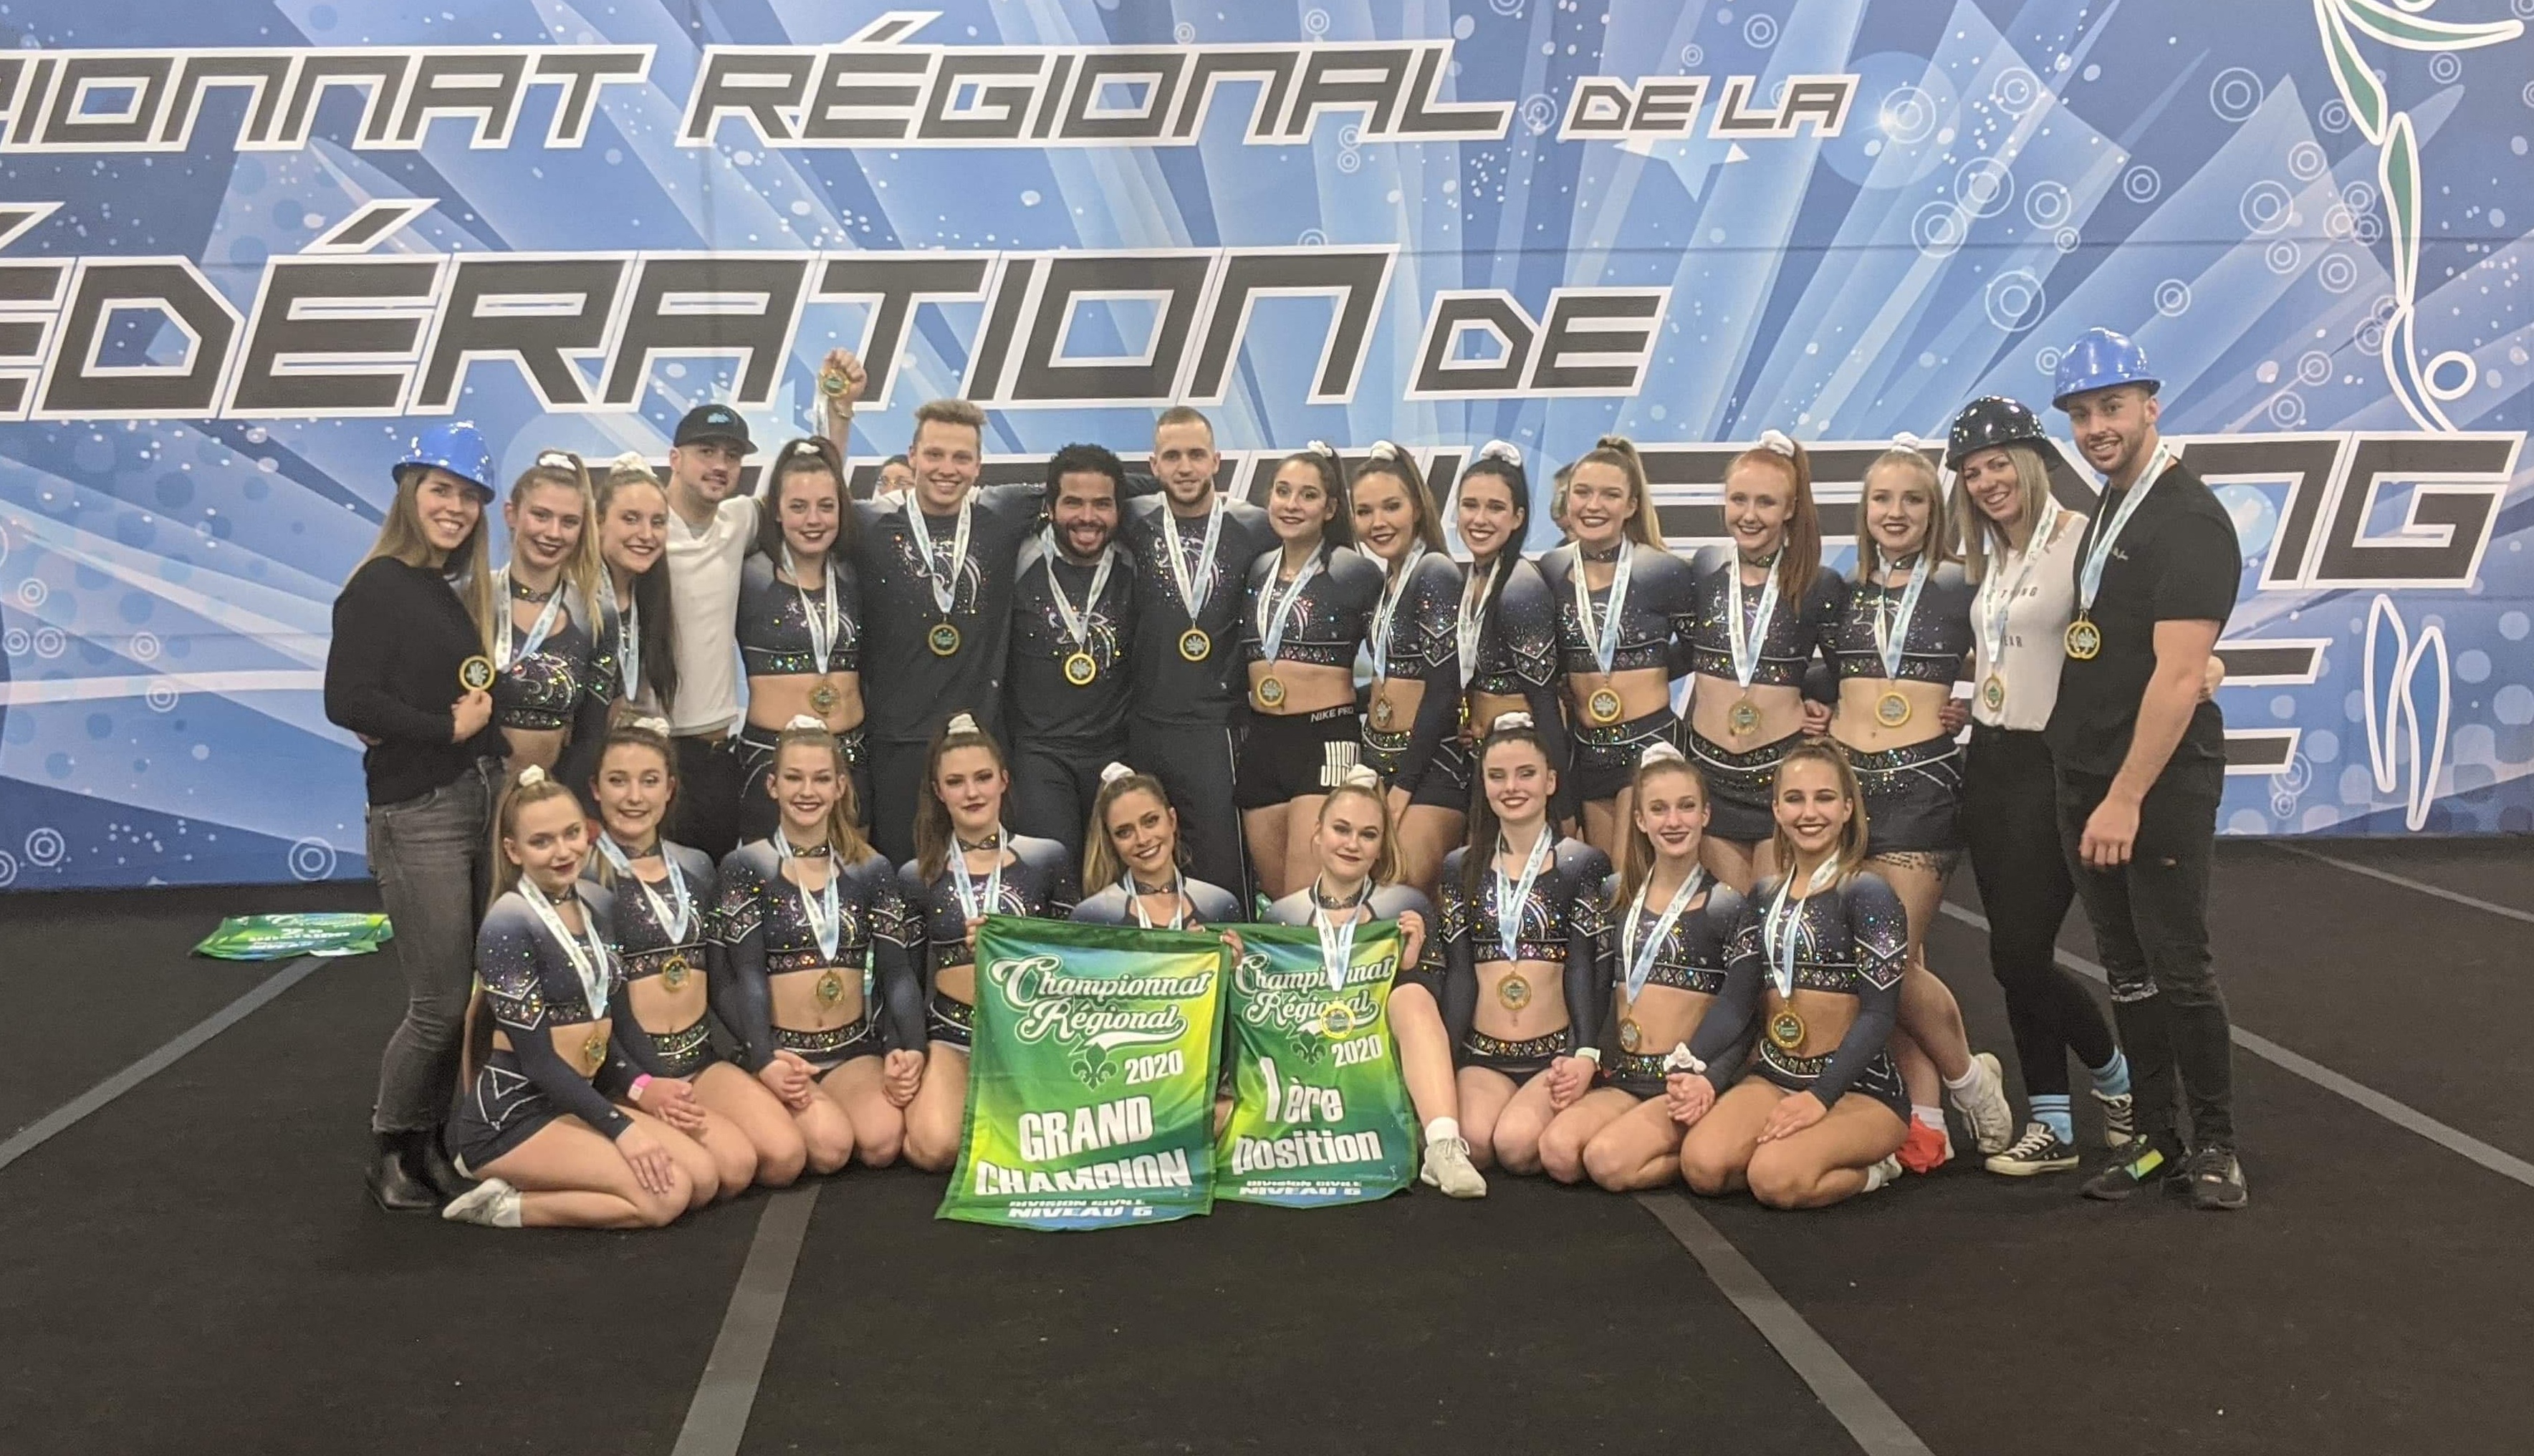 Candiac cheerleaders carry out regionally